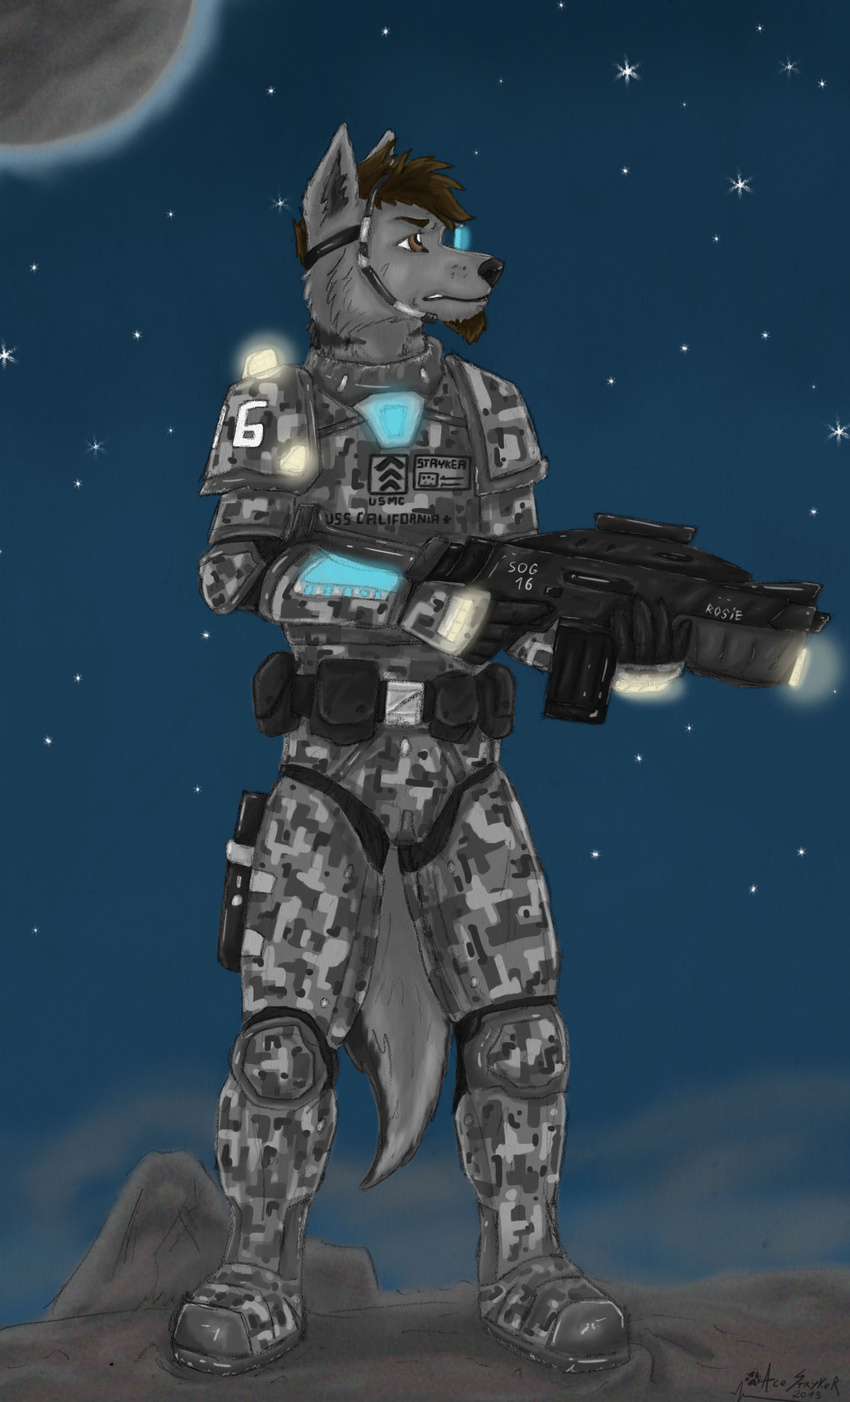 ace_stryker anthro armor assault_rifle brown_eyes brown_hair camo canine eyewear facial_hair futuristic glowing hair male mammal military planet ranged_weapon sci-fi soldier space stars weapon wolf